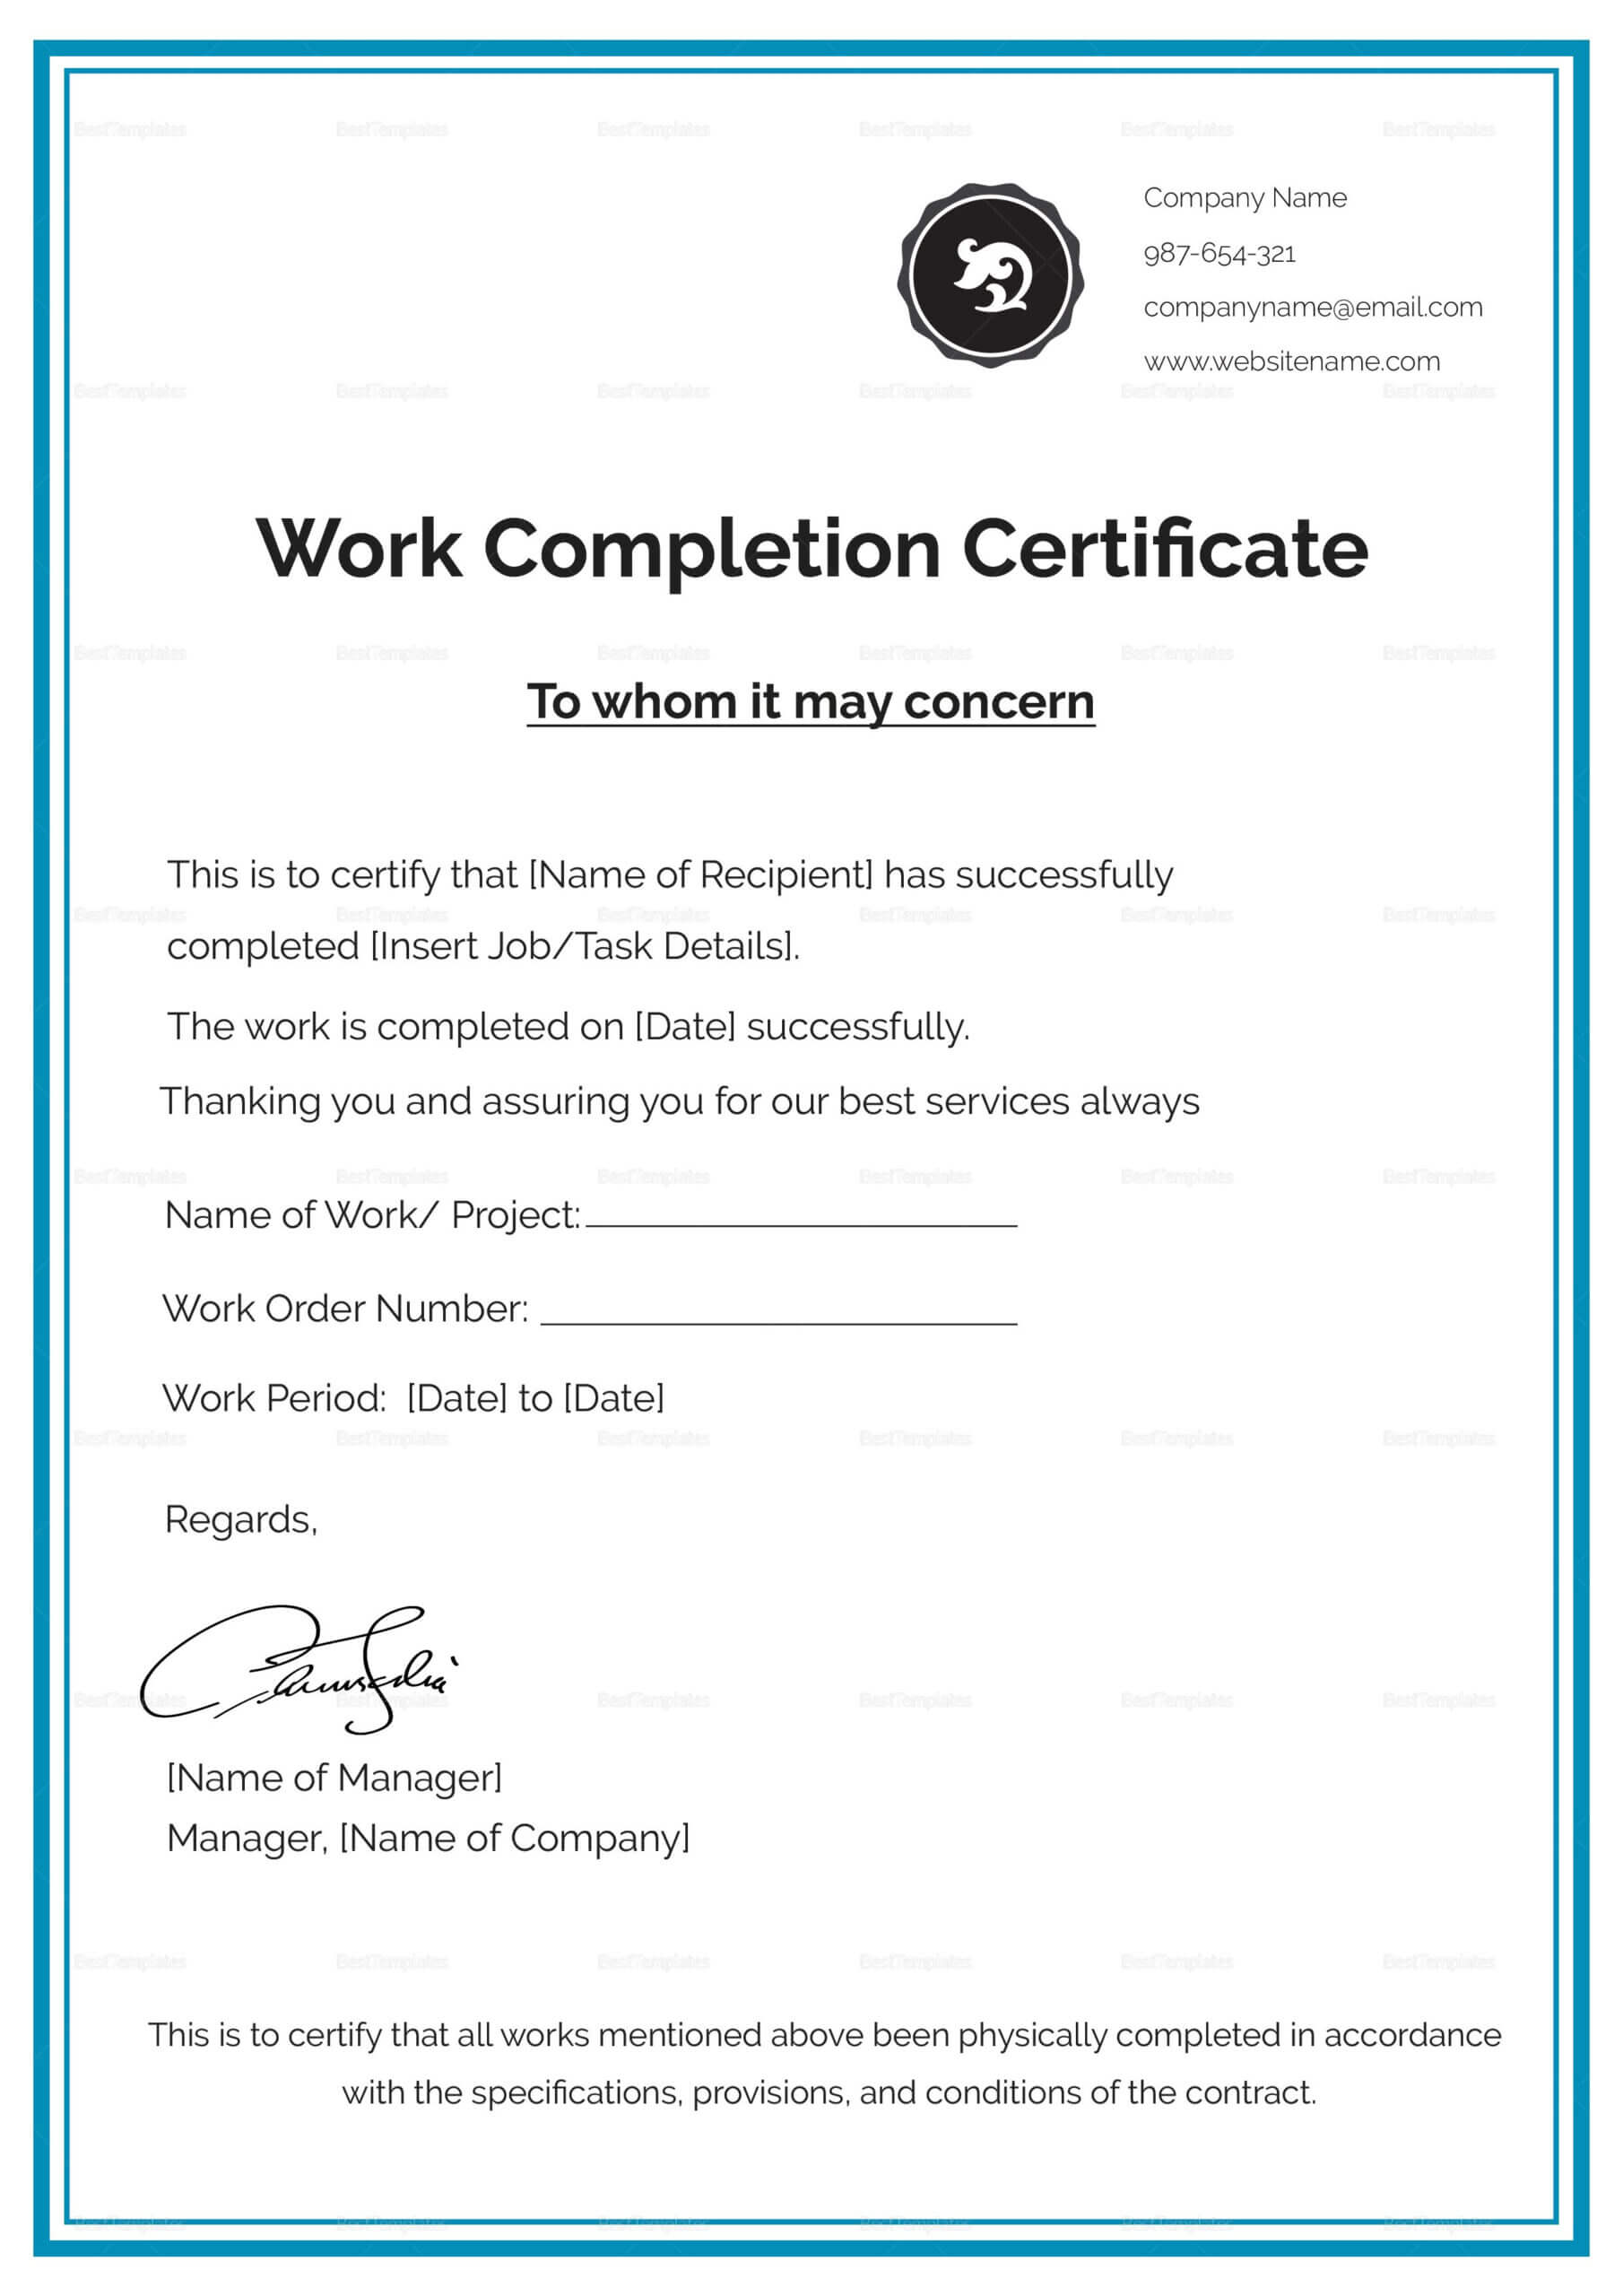 Work Completion Certificate Template In 2020 | Certificate For Certificate Template For Project Completion